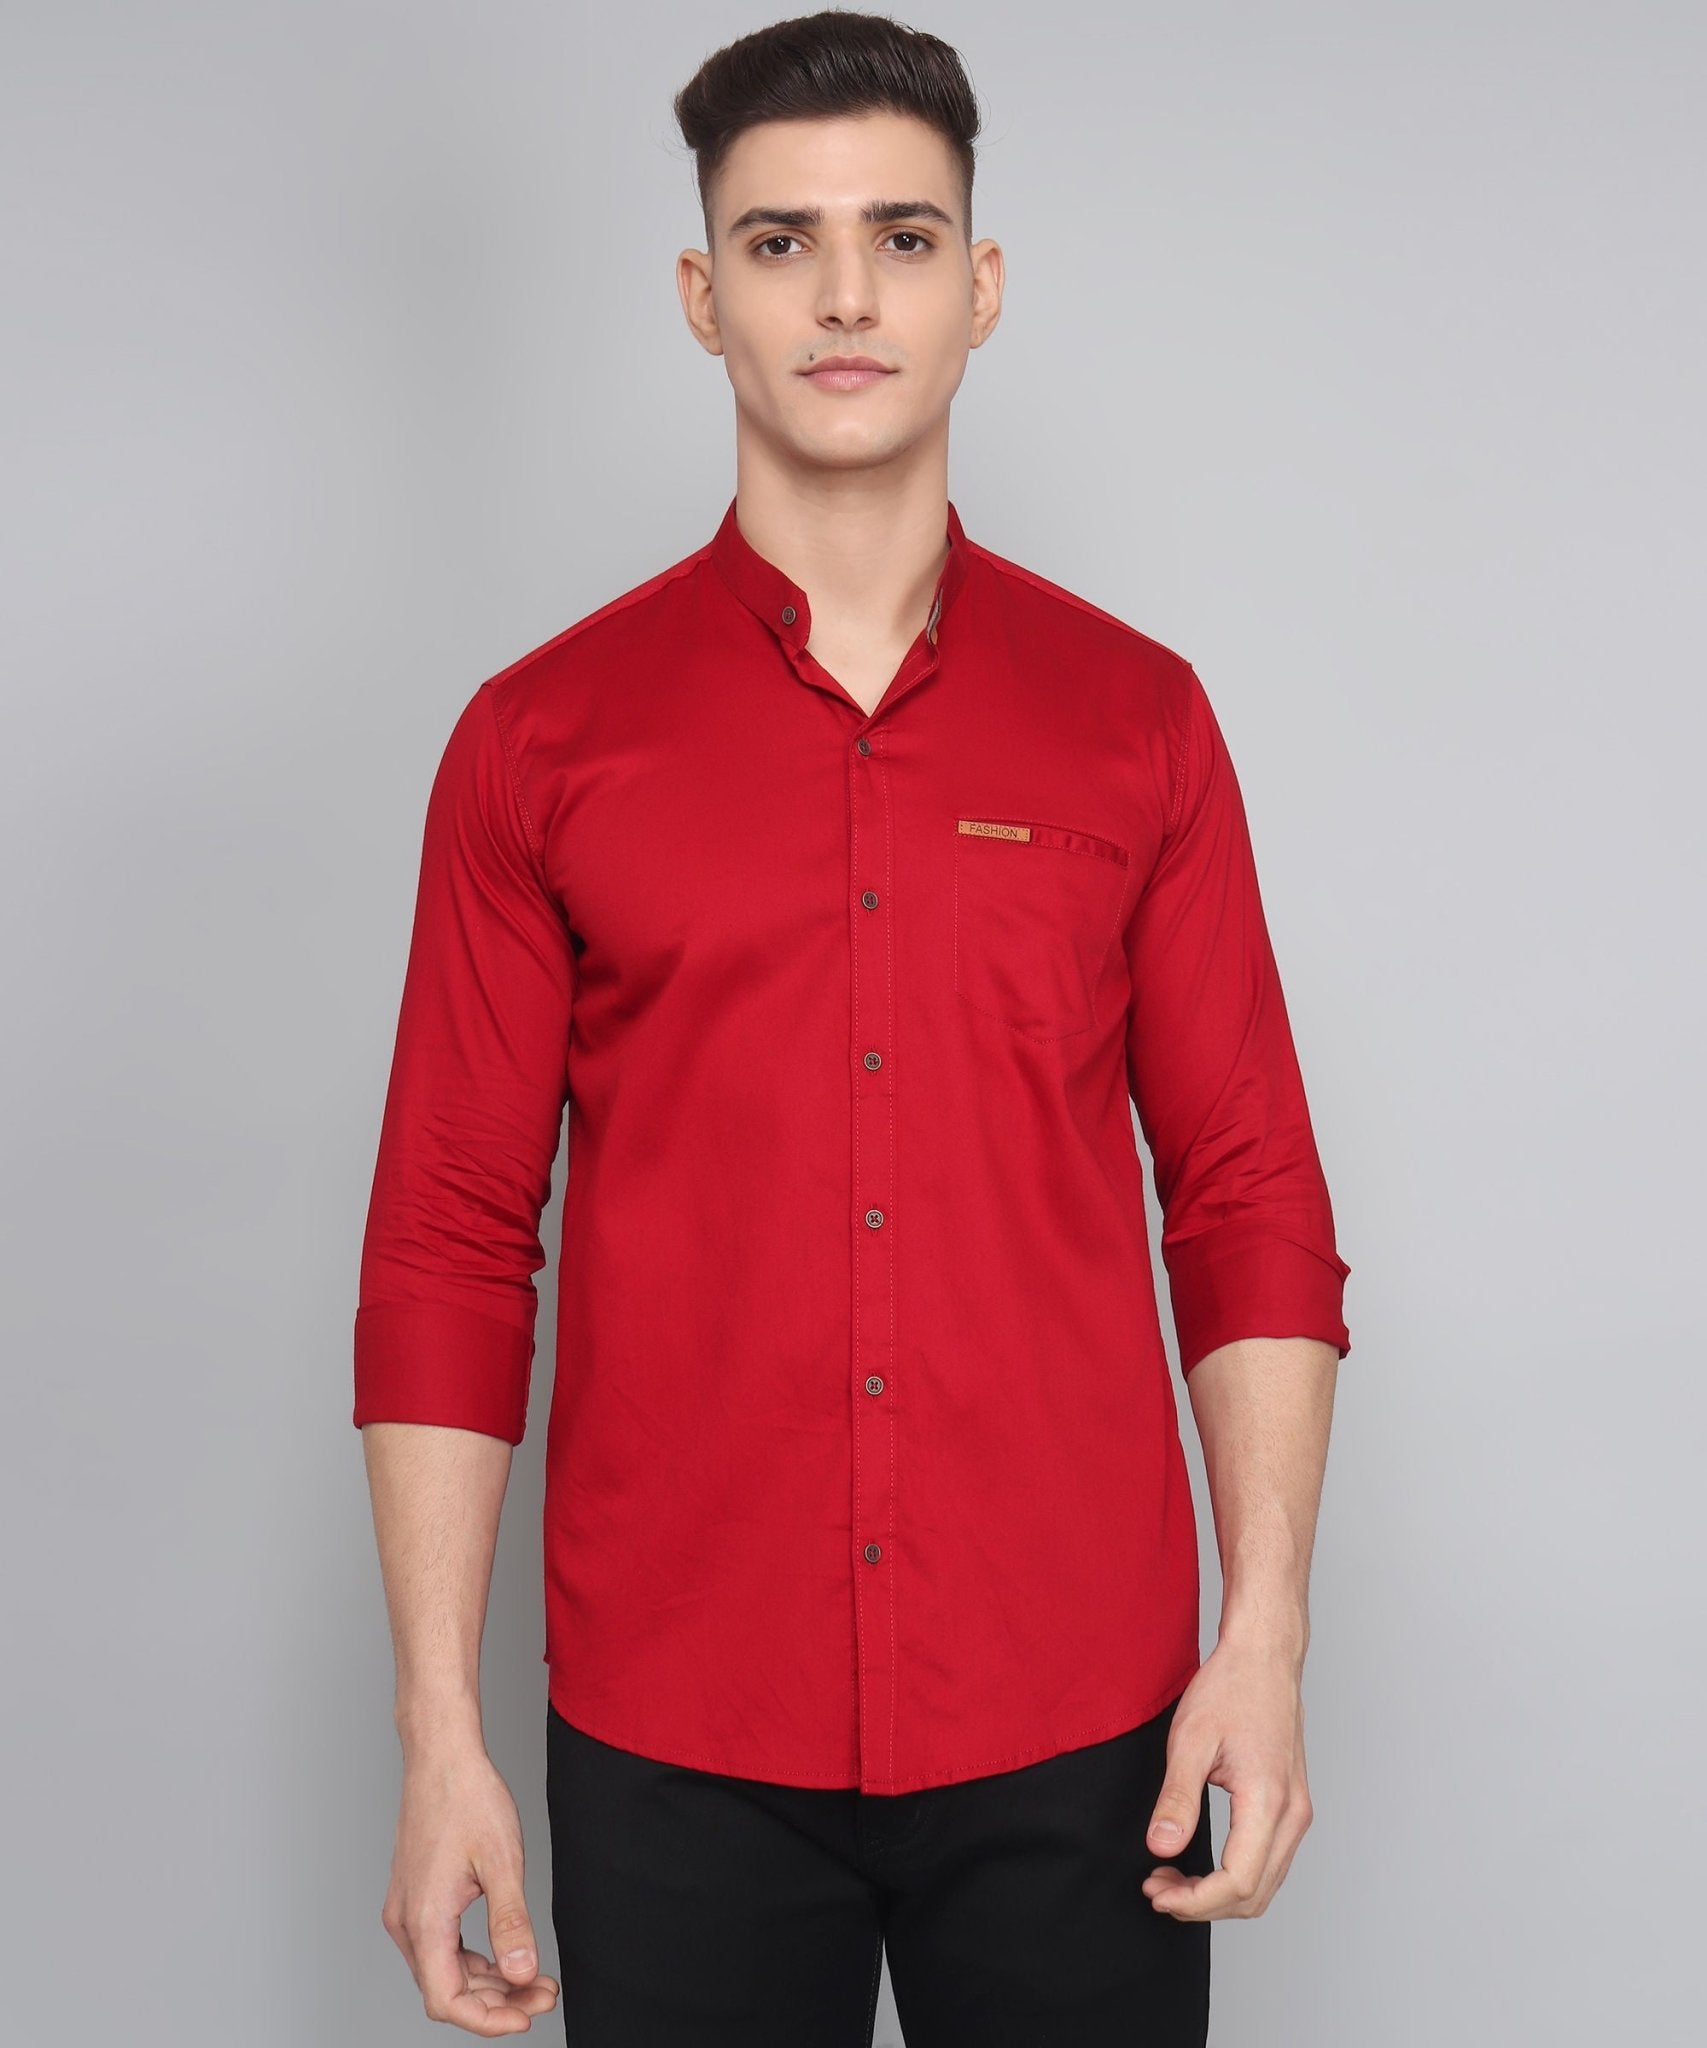 Men's Maroon Casual Cotton Full Sleeve Solid Shirt - TryBuy® USA🇺🇸